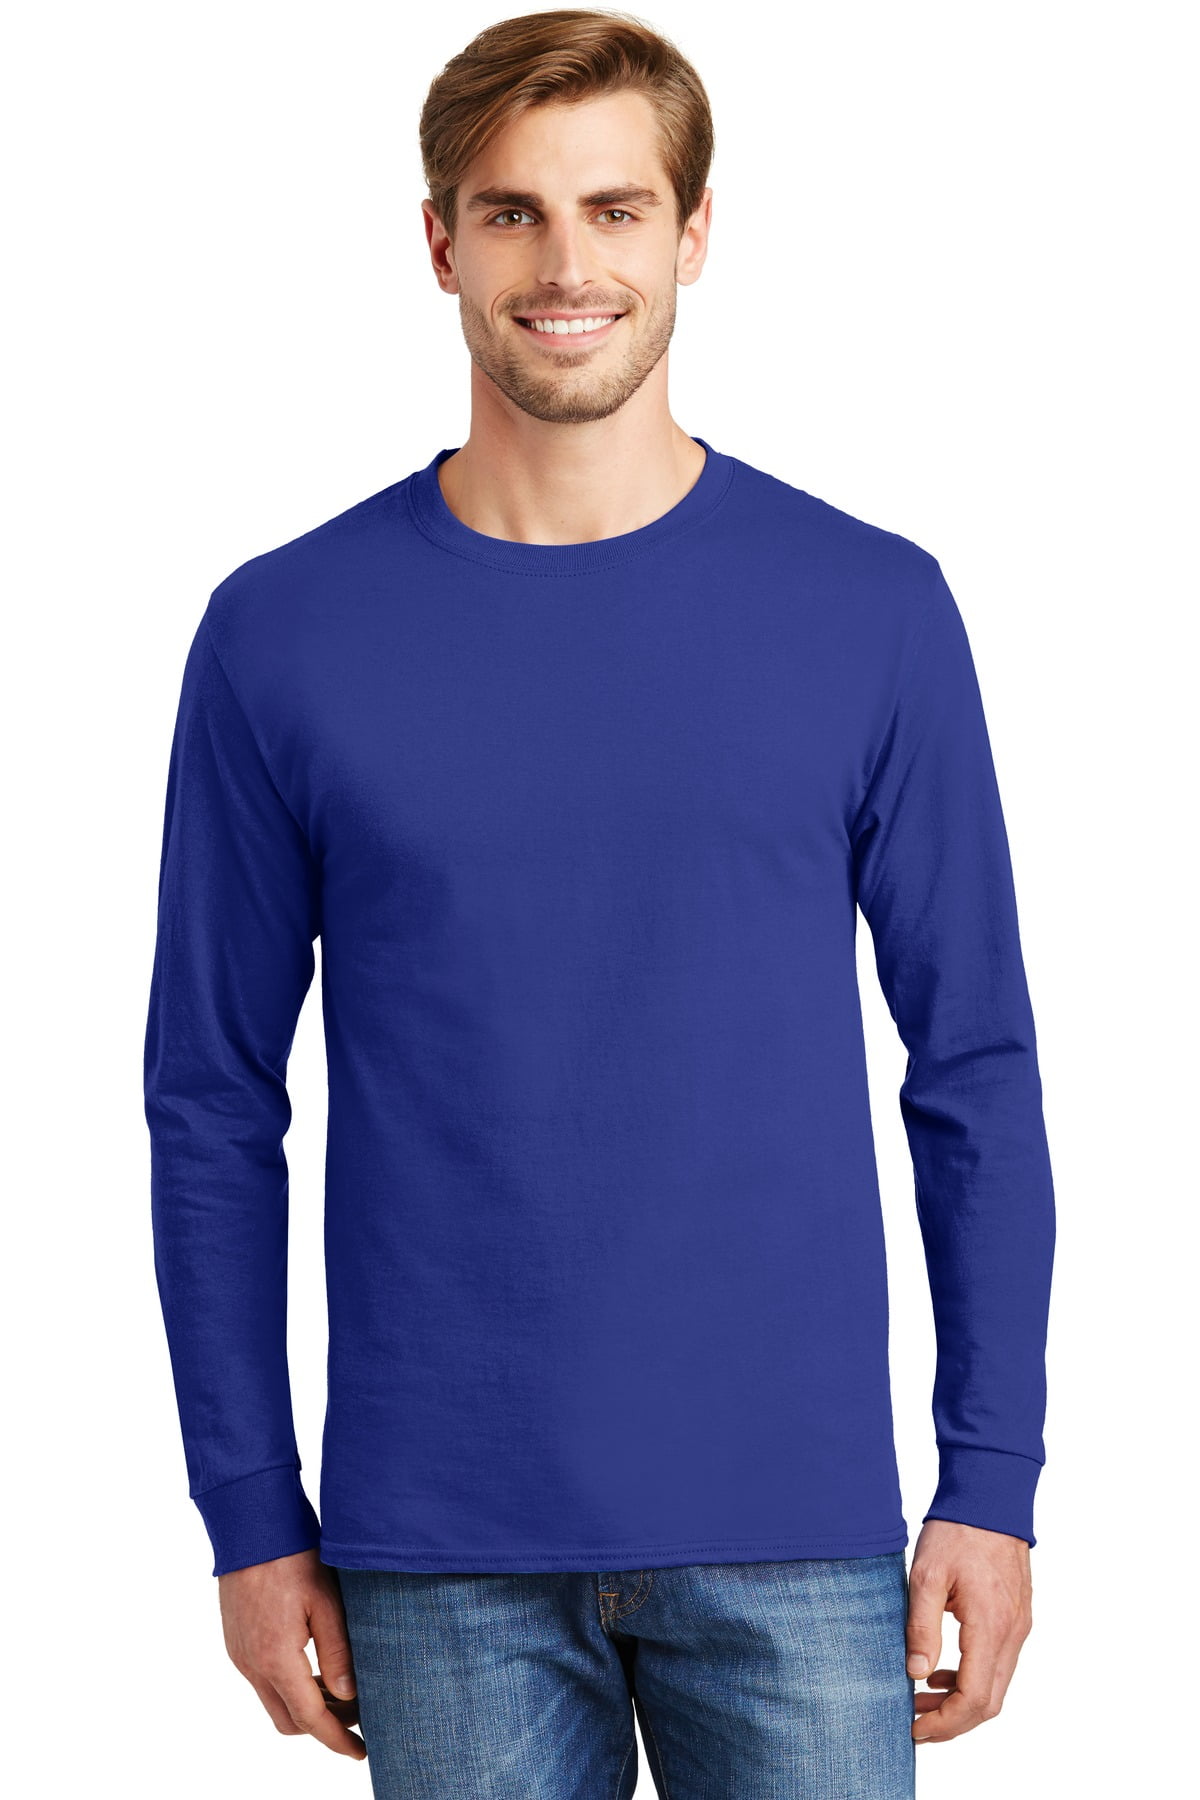 Hanes Men's and Big Men's Authentic Long Sleeve Tee, Up To Size 3XL ...